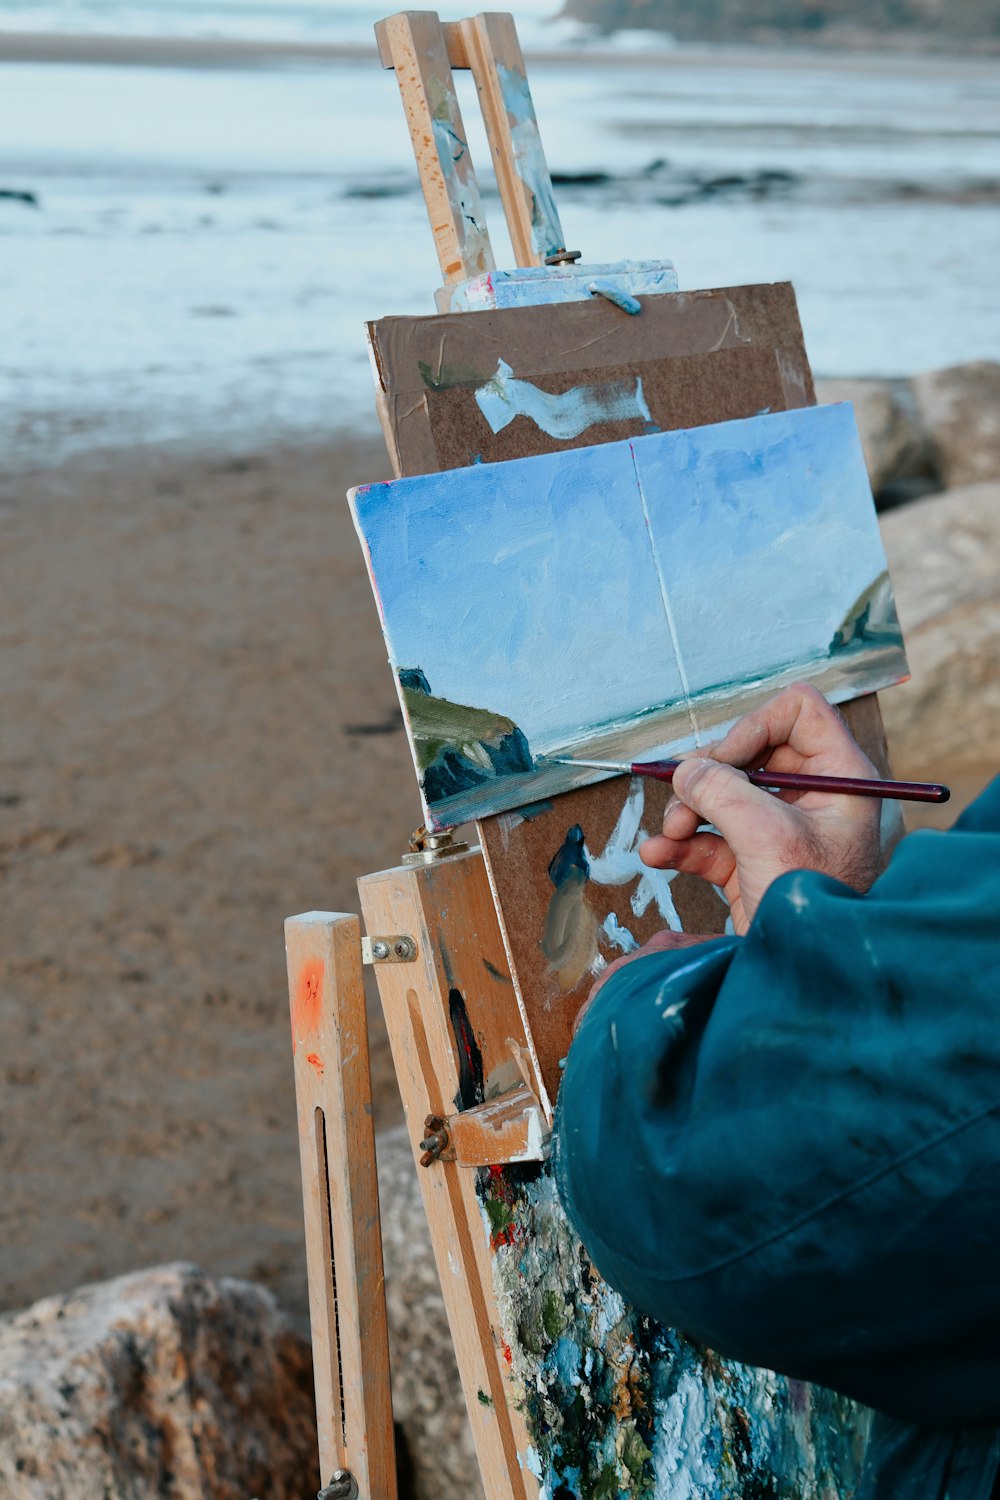 a person is painting on an easel on the beach